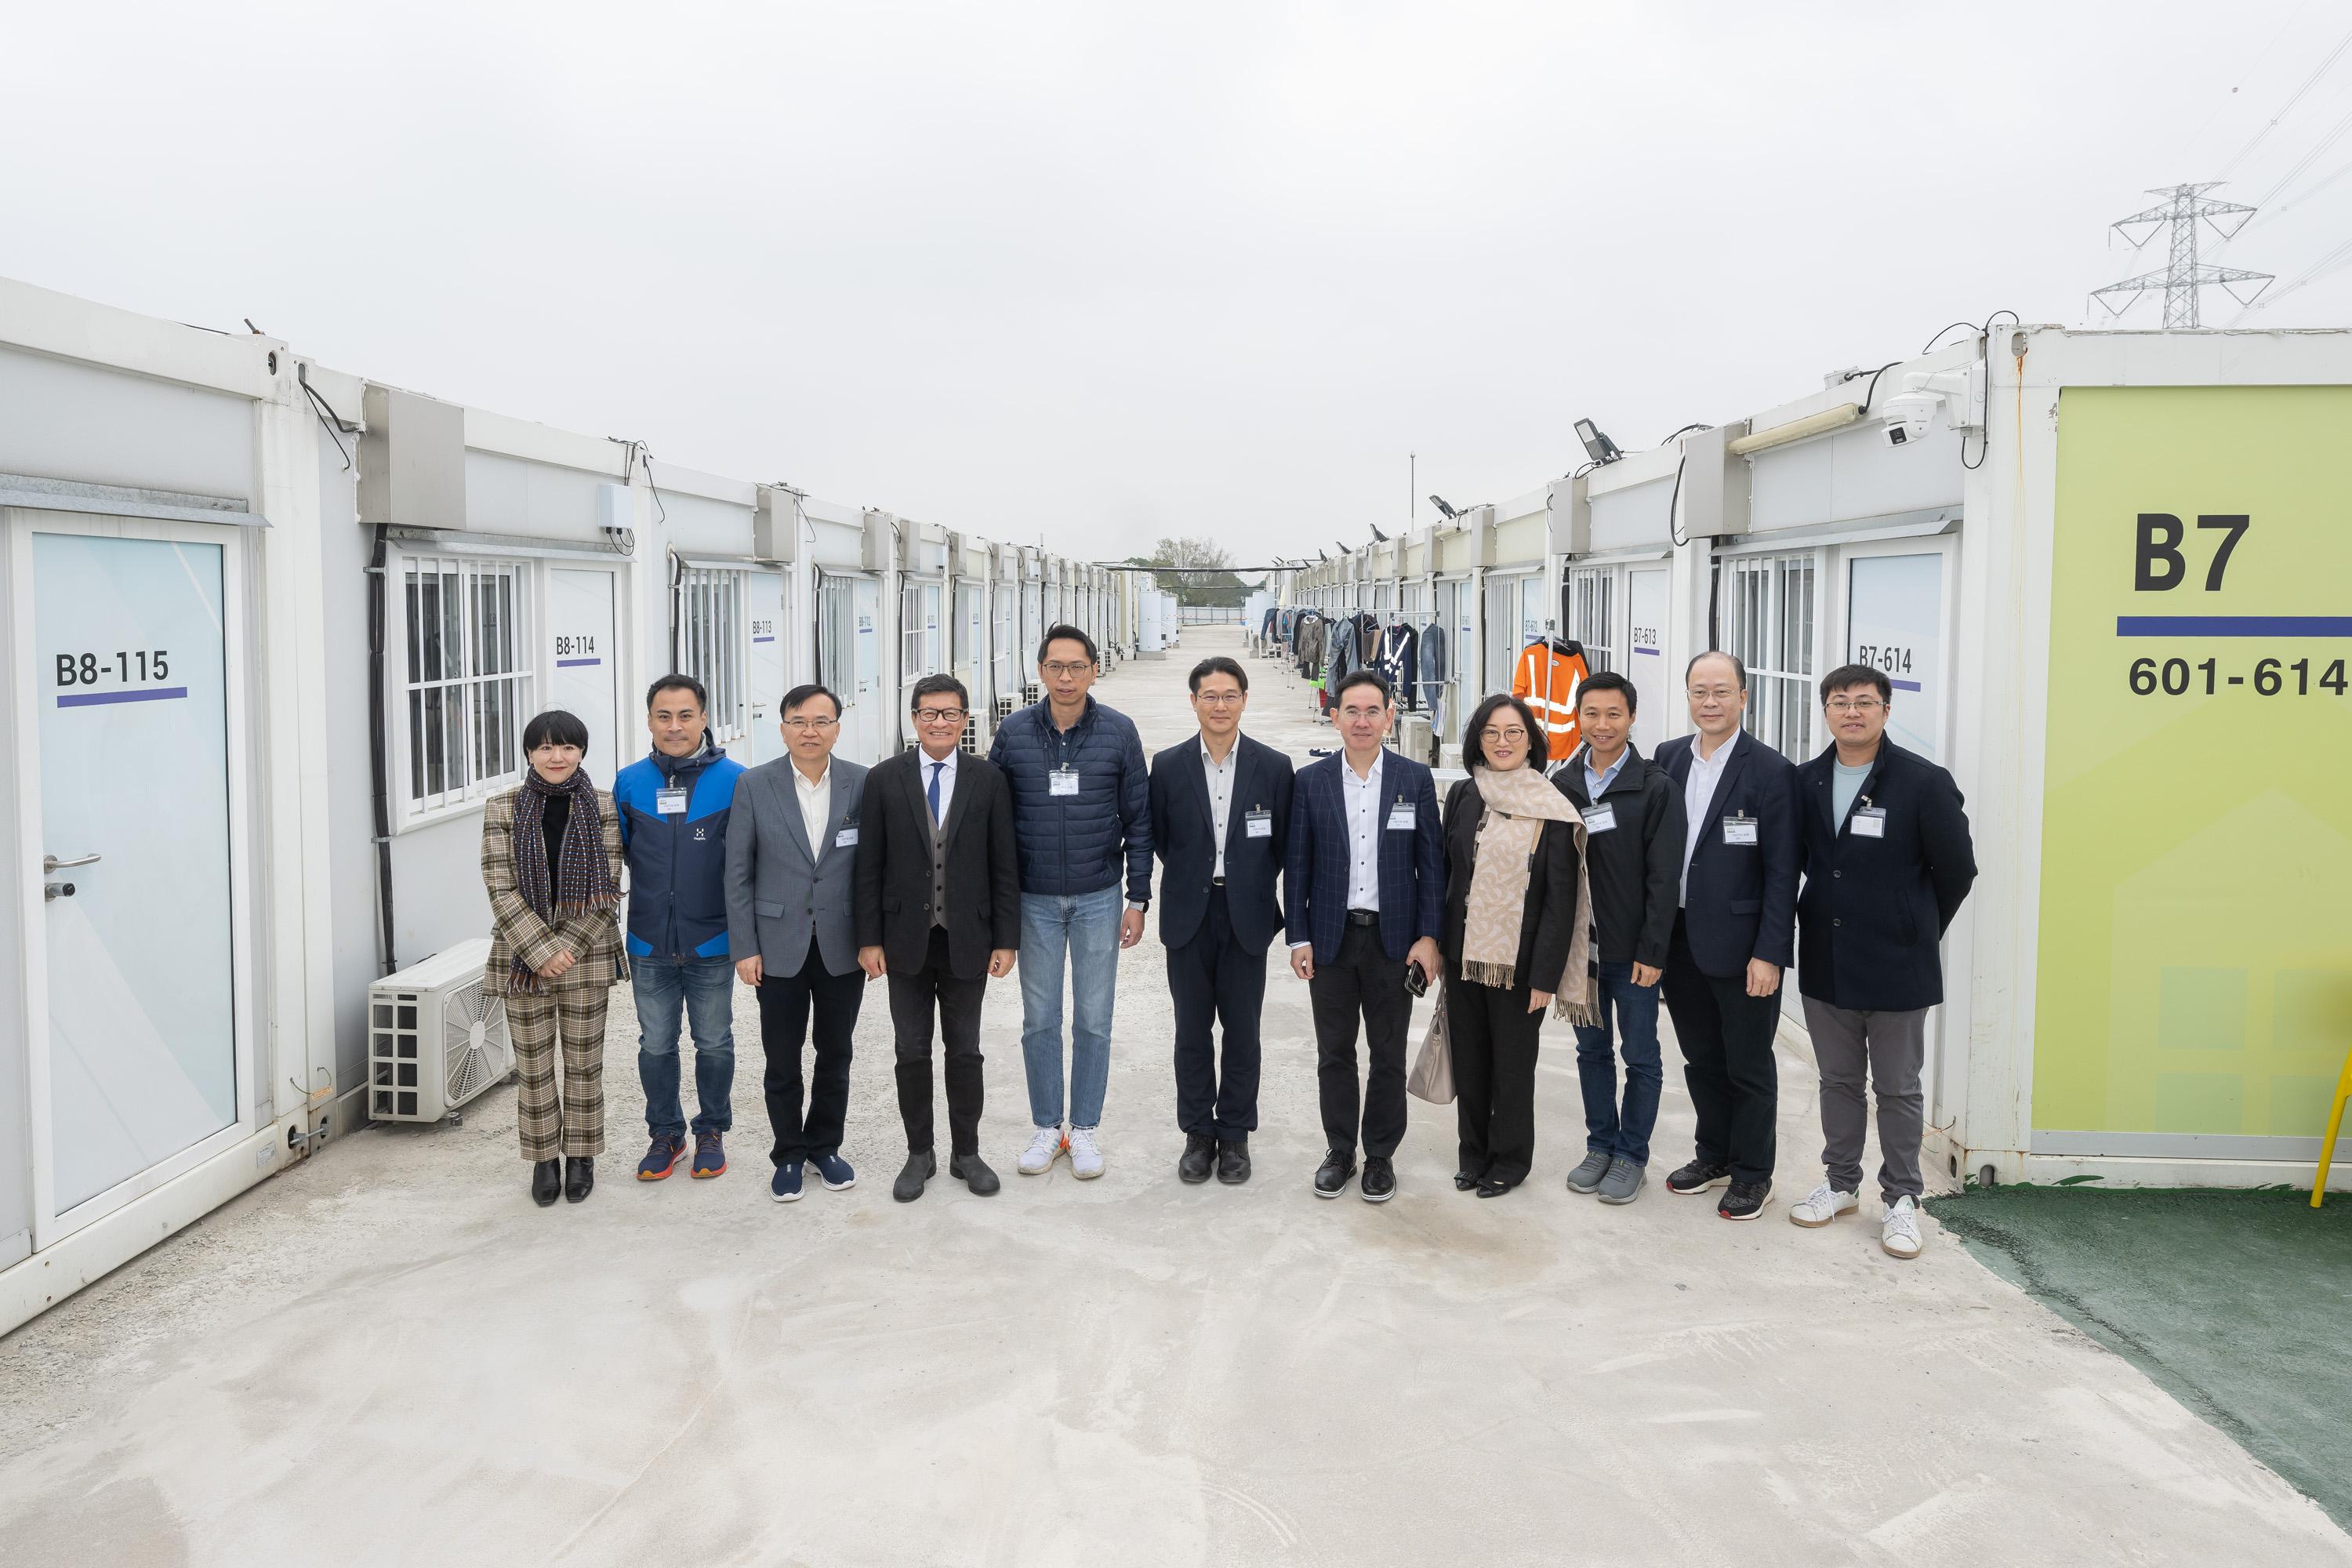 The Legislative Council Panel on Manpower visited the Construction Sector Imported Labour Quarters in Tam Mi, Yuen Long, today (December 19). Photo shows the Chairman of the Panel, Mr Luk Chung-hung (fifth left), the Deputy Chairman of the Panel, Mr Lam Chun-sing (third right), other Members, the Acting Secretary for Development, Mr David Lam (fifth right), and representatives of the Administration and the Construction Industry Council in the Construction Sector Imported Labour Quarters.